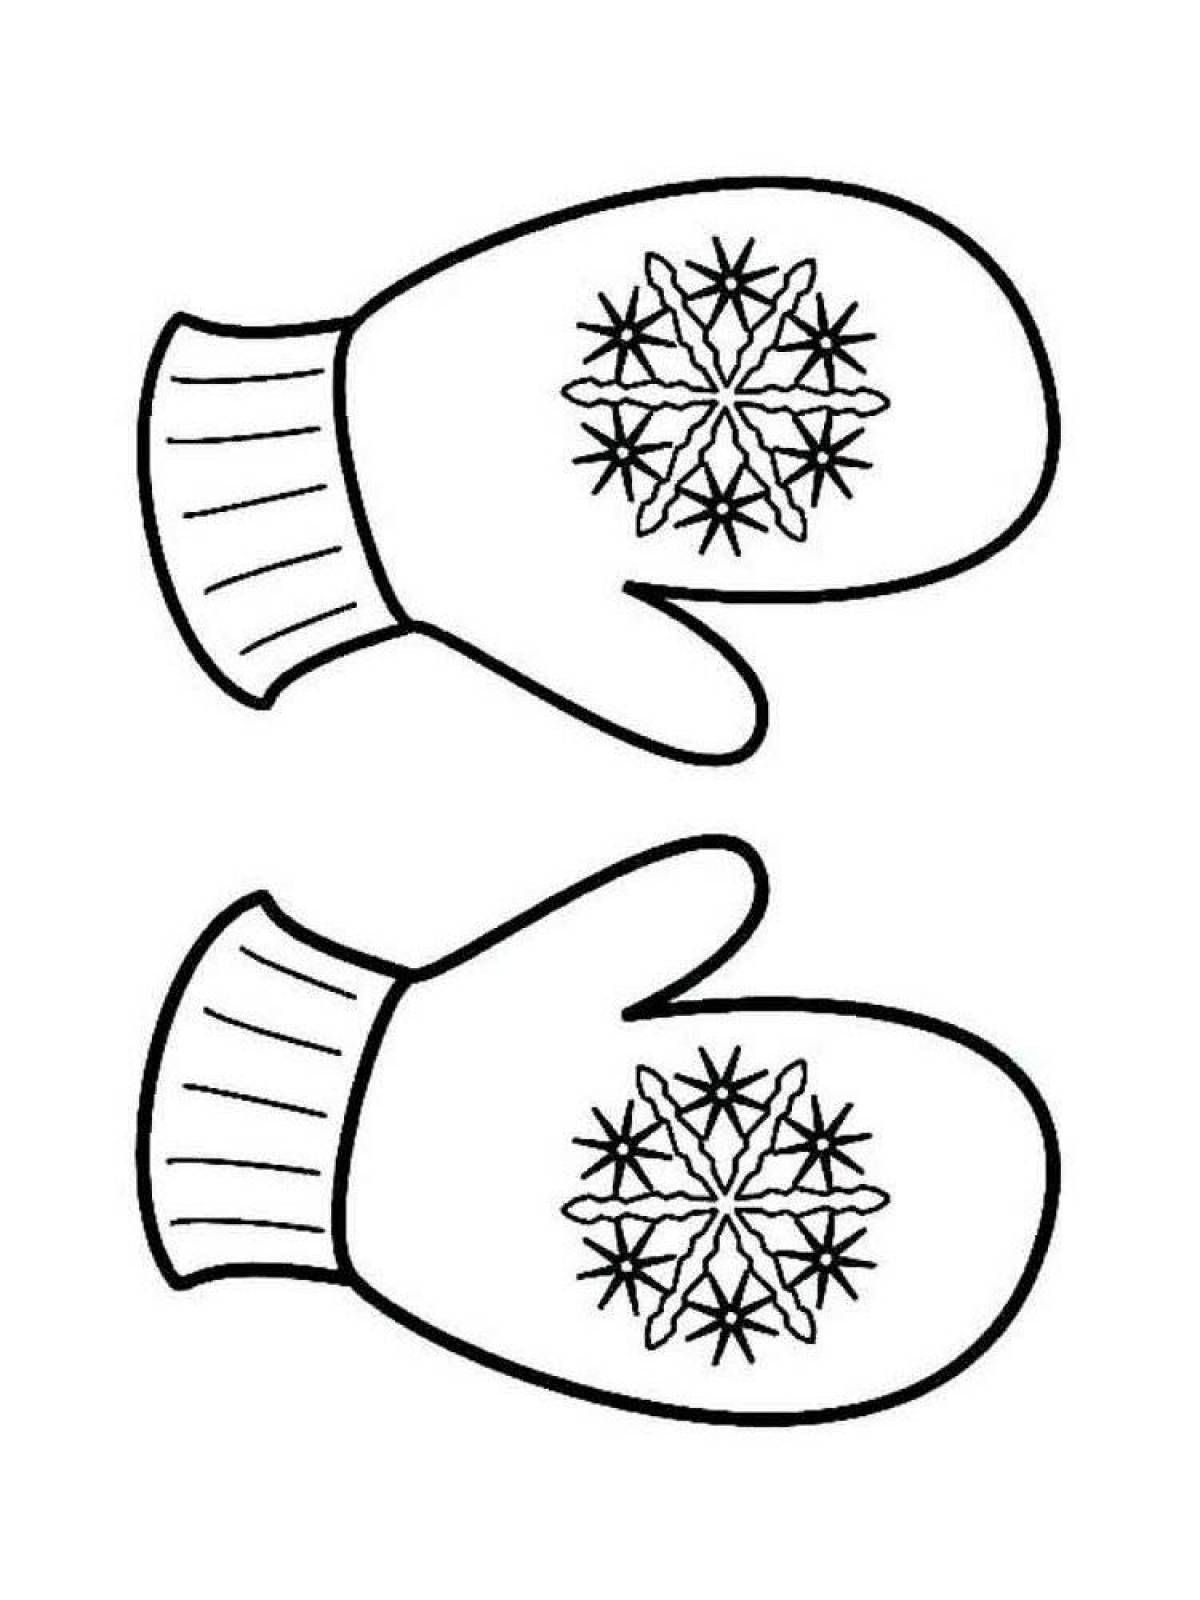 Student mitten coloring book